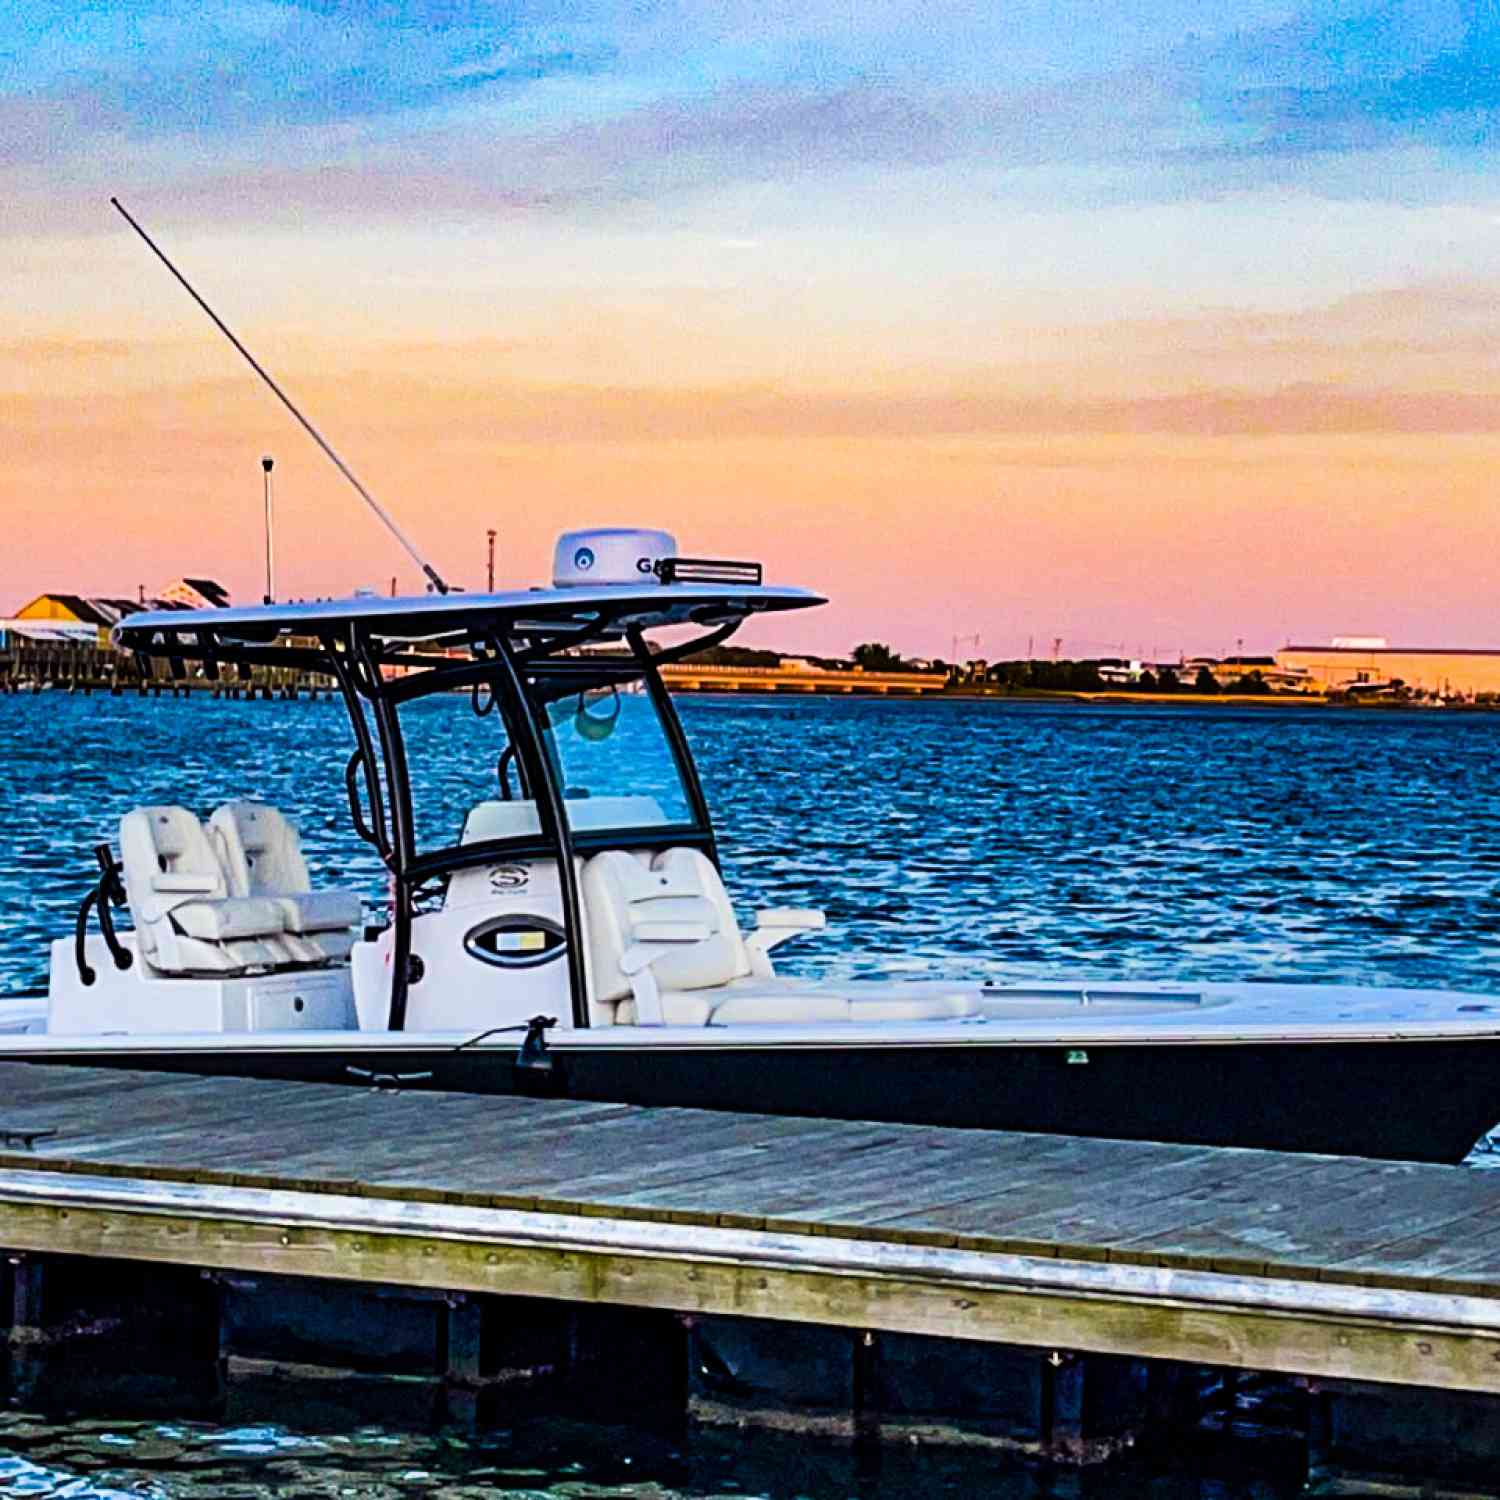 Title: At Rest - On board their Sportsman Masters 267OE Bay Boat - Location: Swansboro, NC. Participating in the Photo Contest #SportsmanJune2021